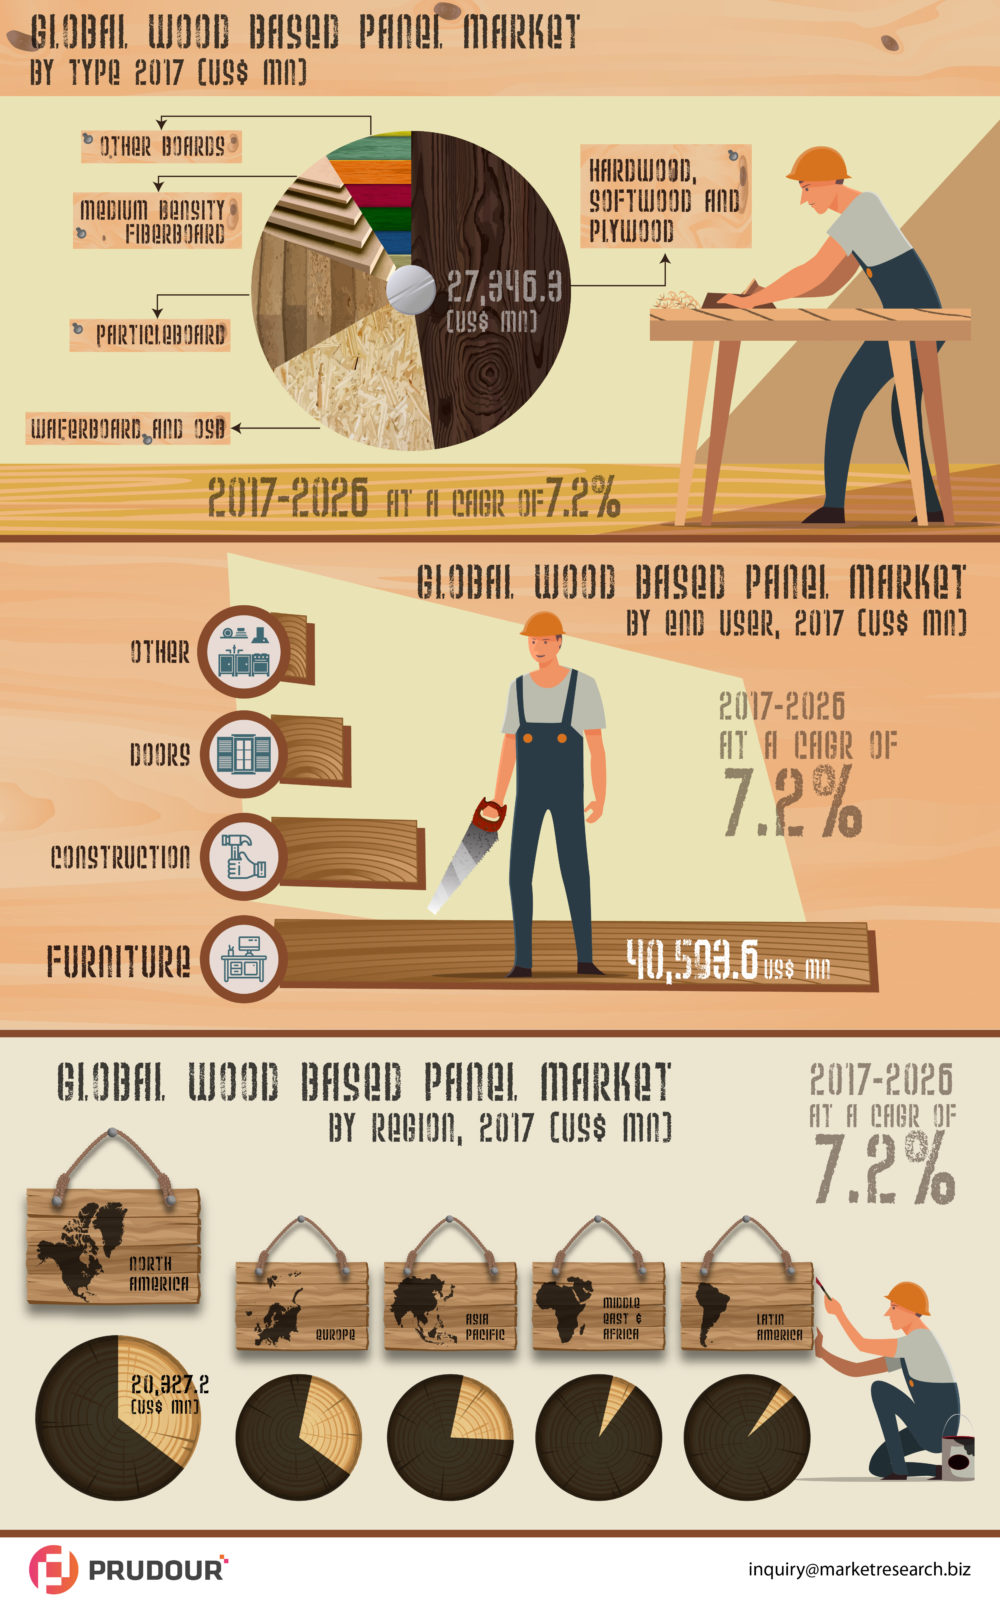 CAGR Of 7 %: Worldwide Wood Based Panel Market about to hit CAGR of 7 % from 2017 to 2026